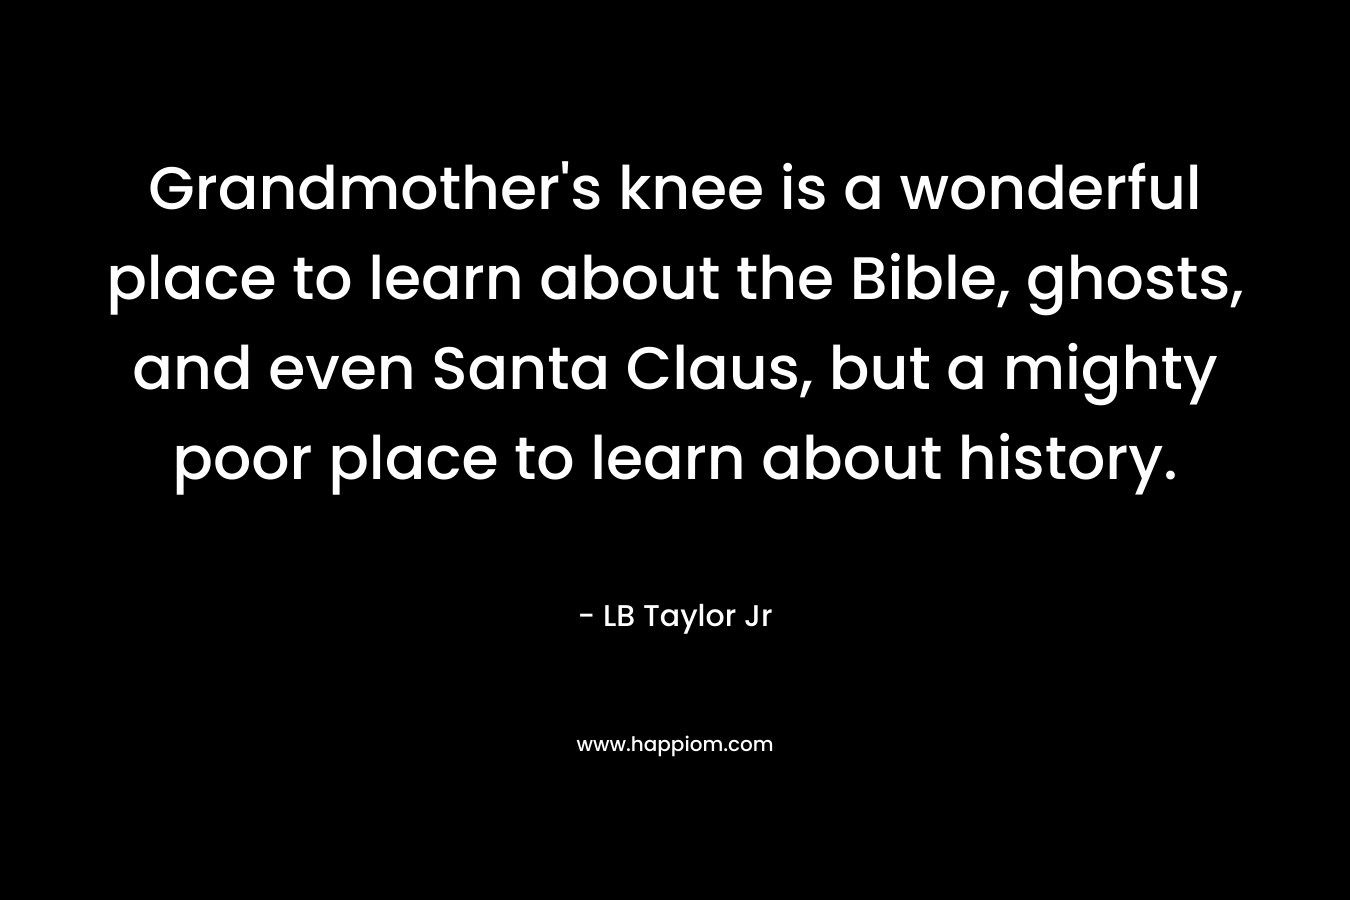 Grandmother’s knee is a wonderful place to learn about the Bible, ghosts, and even Santa Claus, but a mighty poor place to learn about history. – LB Taylor Jr